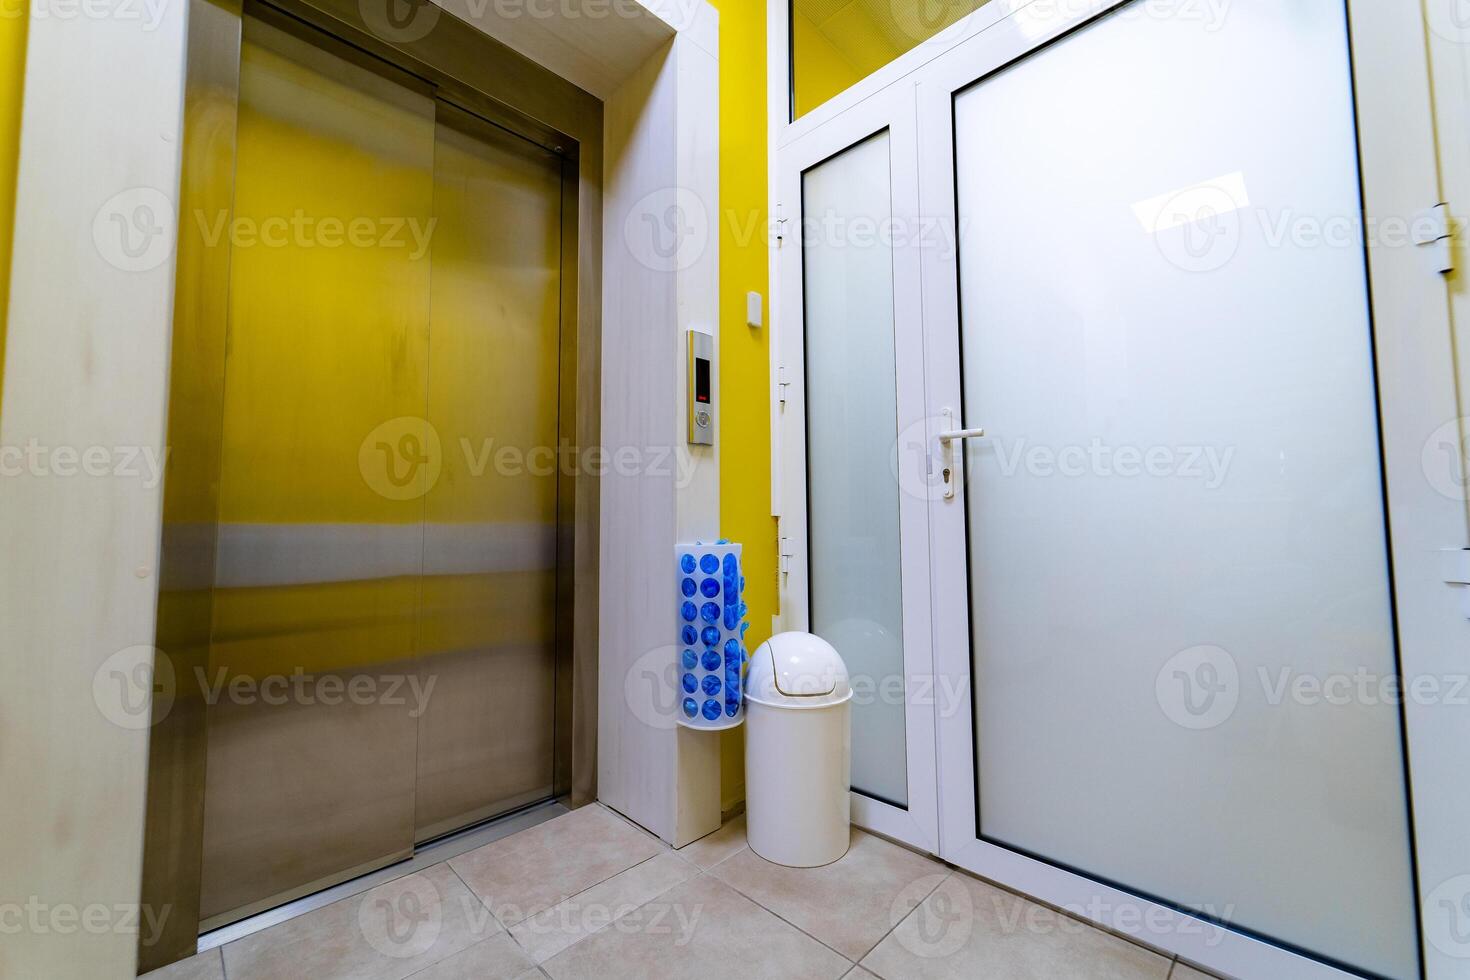 Laboratory front door, medicine, science, health care, emergency and interior concept - doors at hospital, lift, shoe cover box and trash bin. photo